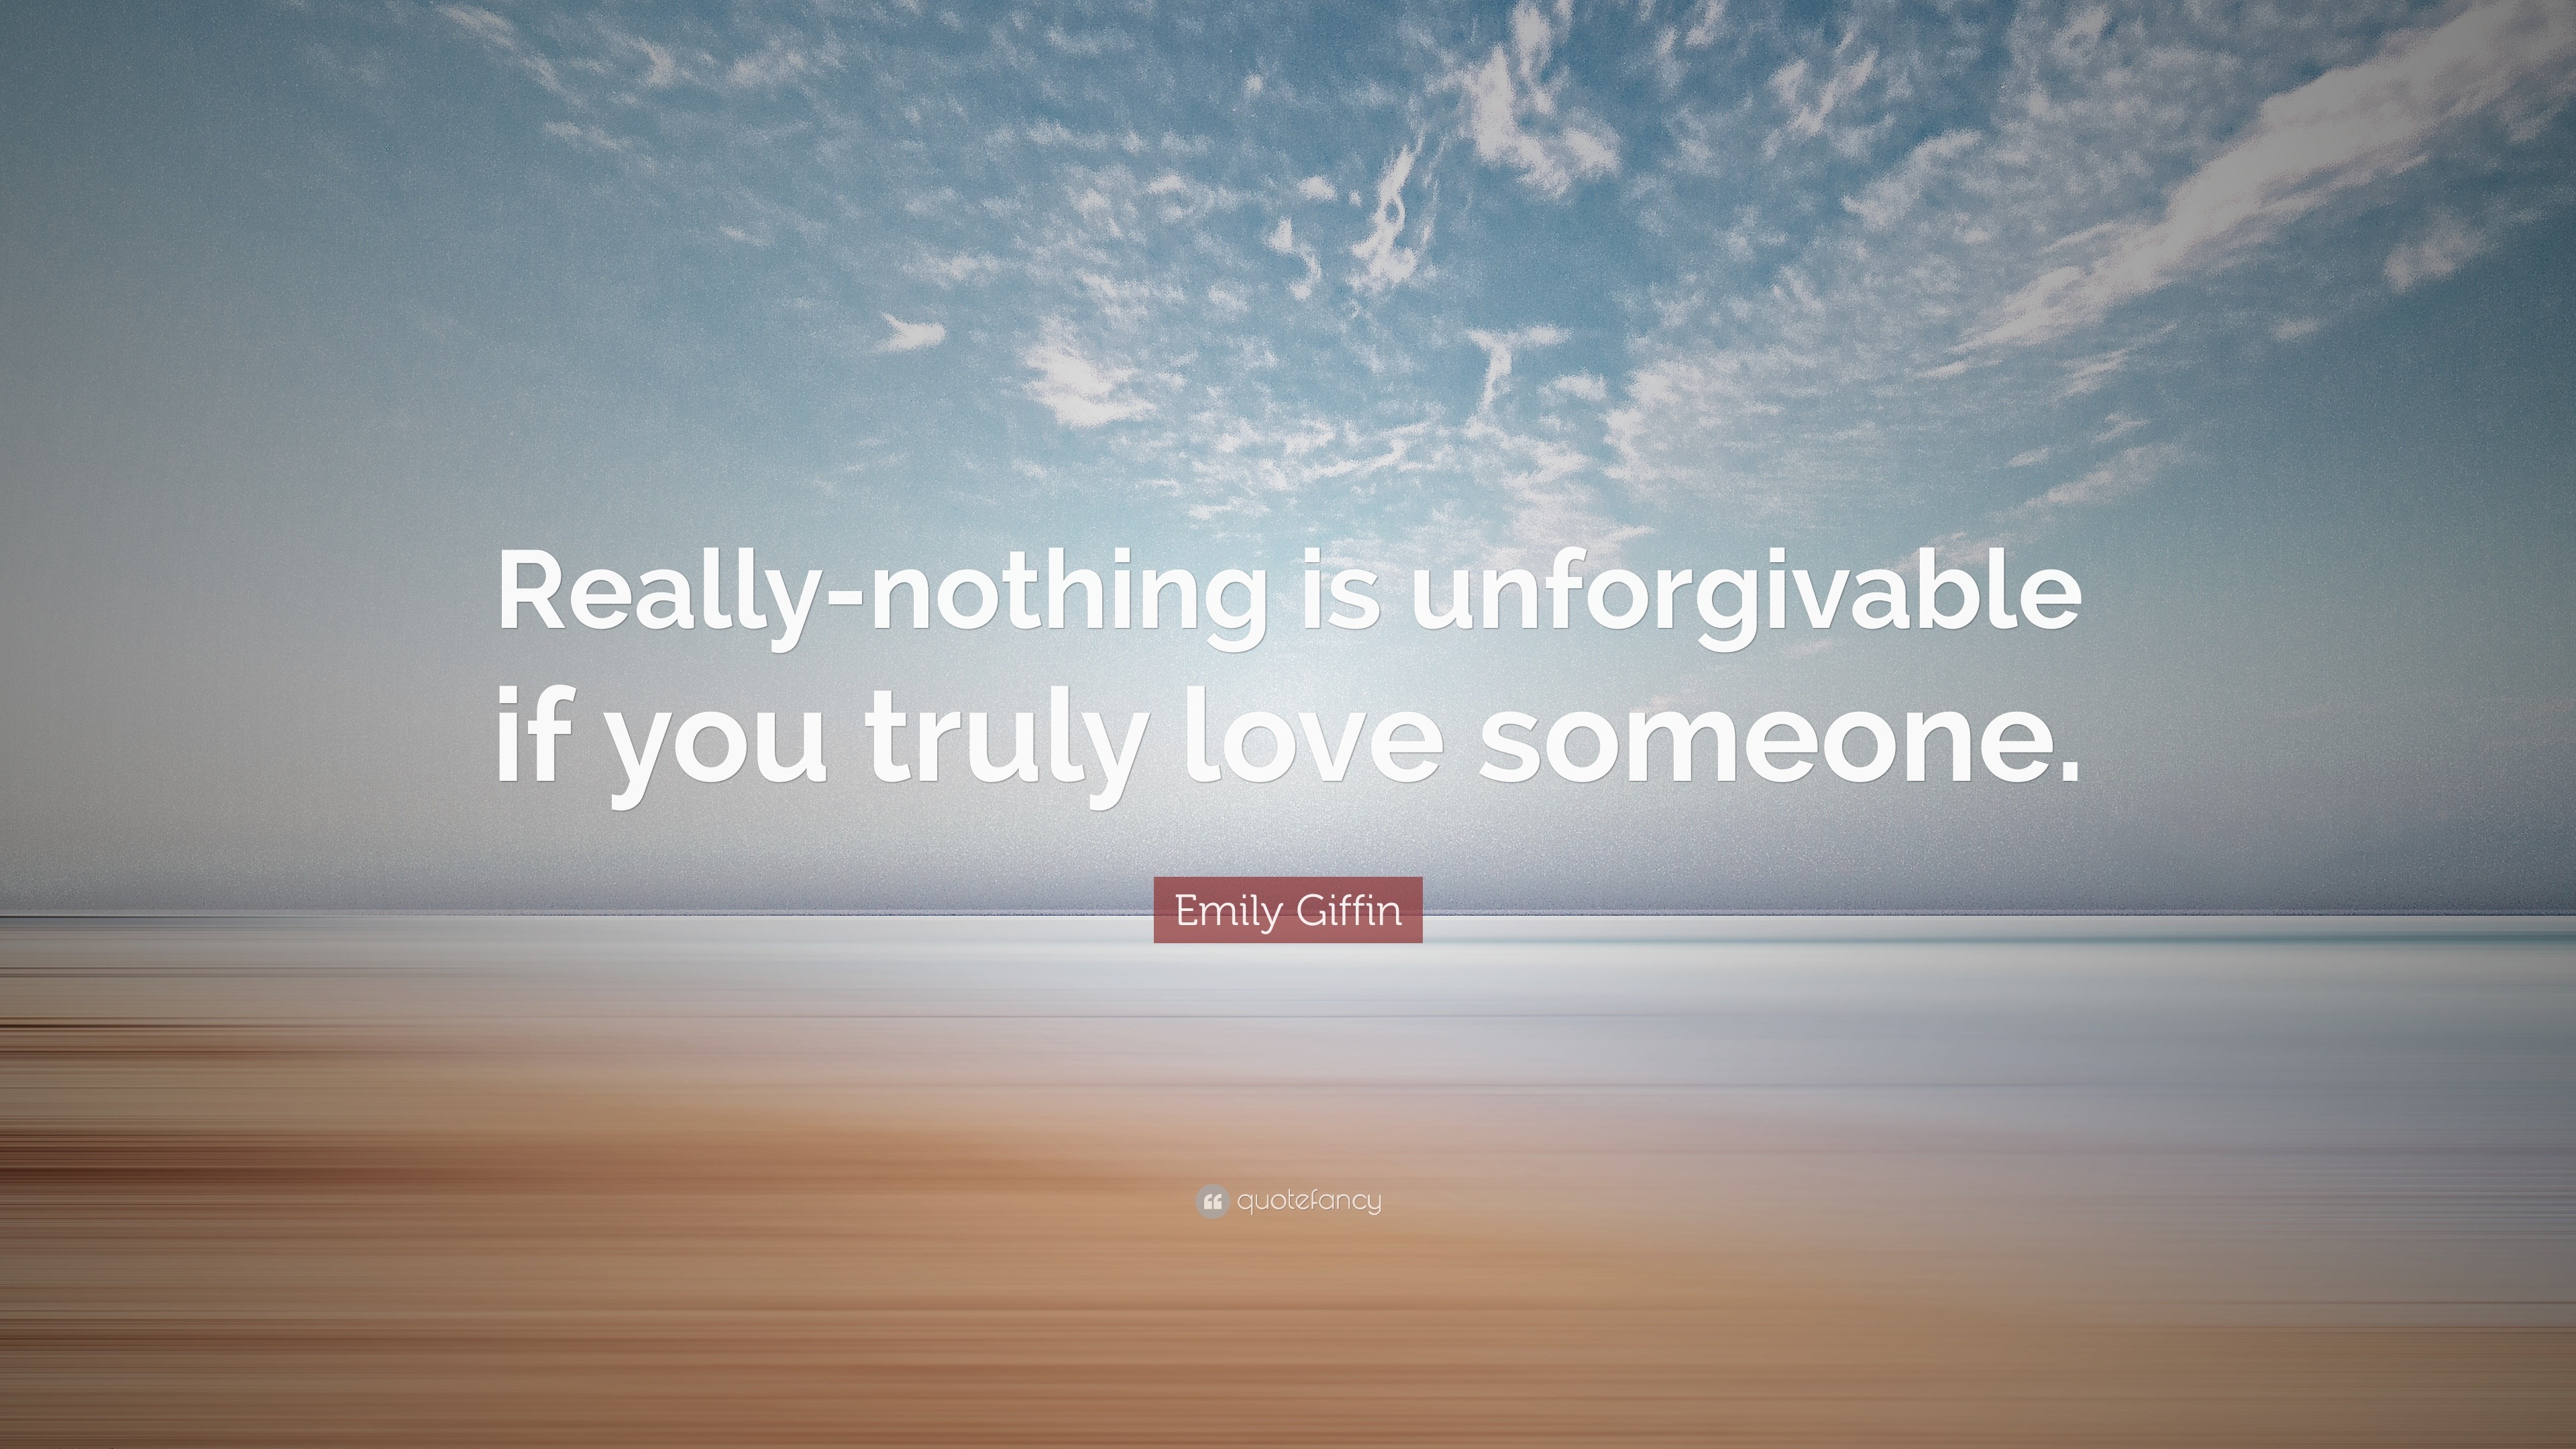 Emily Giffin Quote “Really nothing is unforgivable if you truly love someone